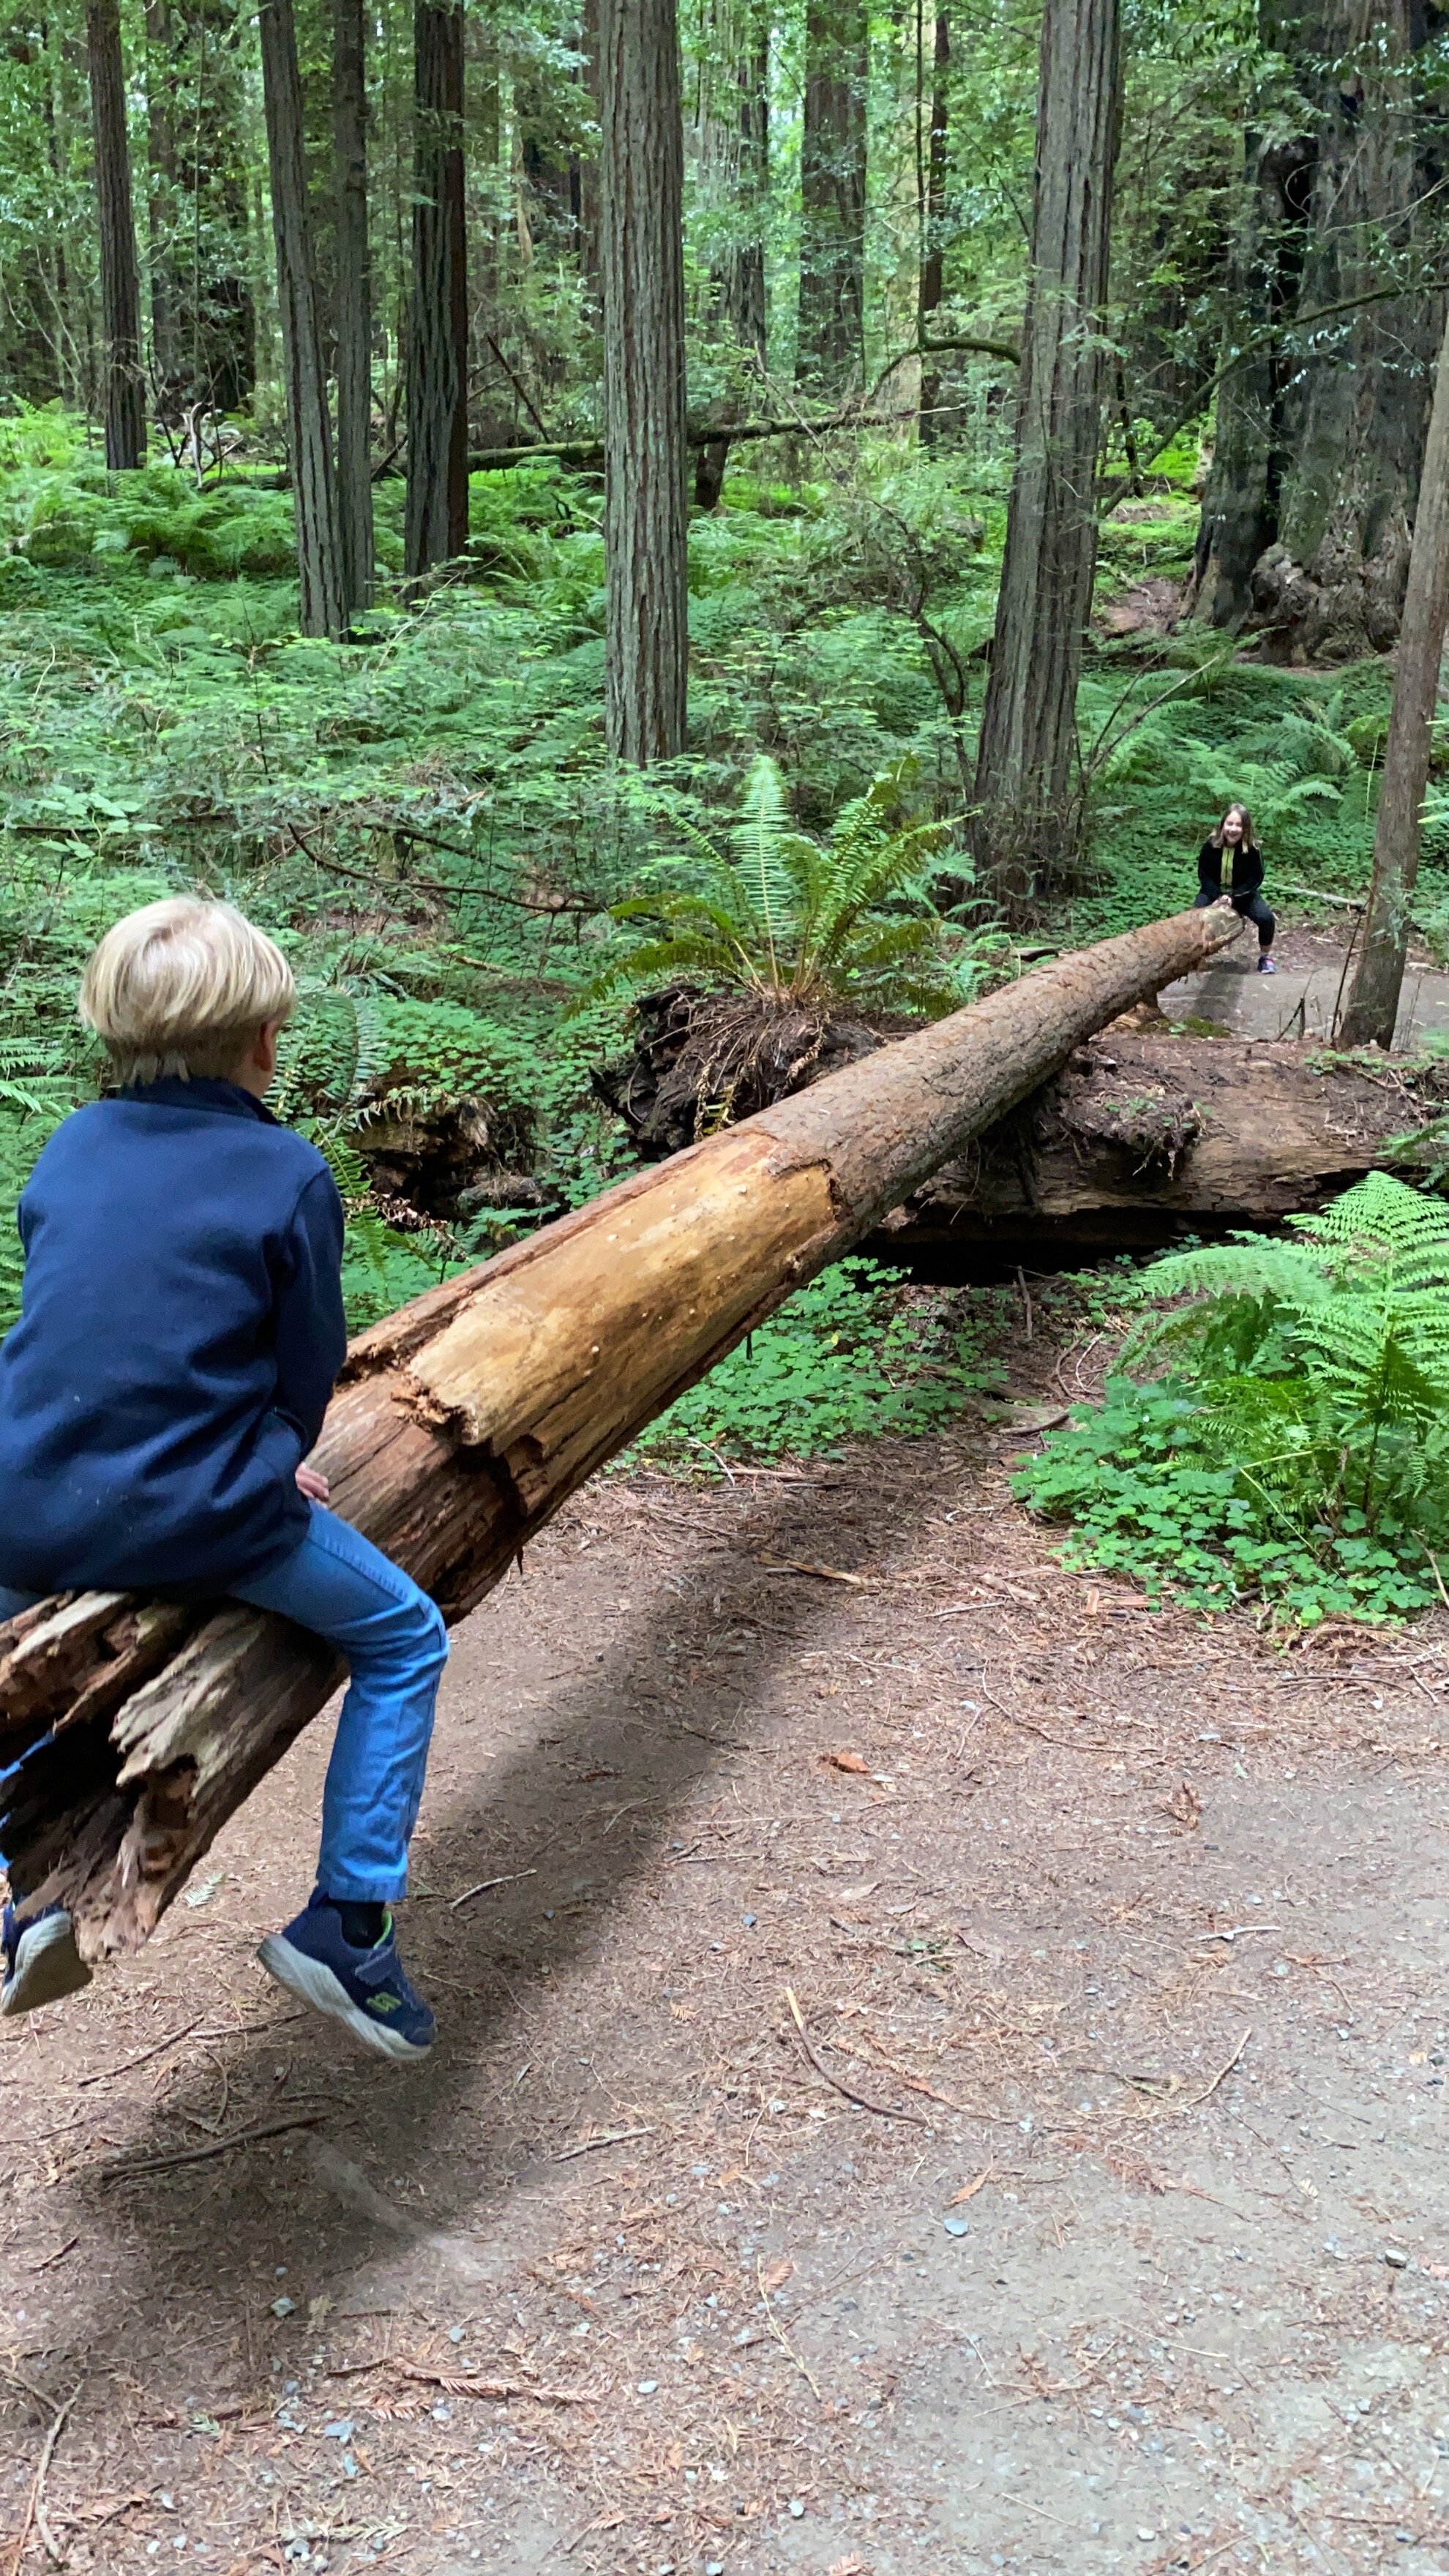 How often do you get the chance to ride a redwood seesaw?!  Photo by Karen Boudreaux, June 11, 2021